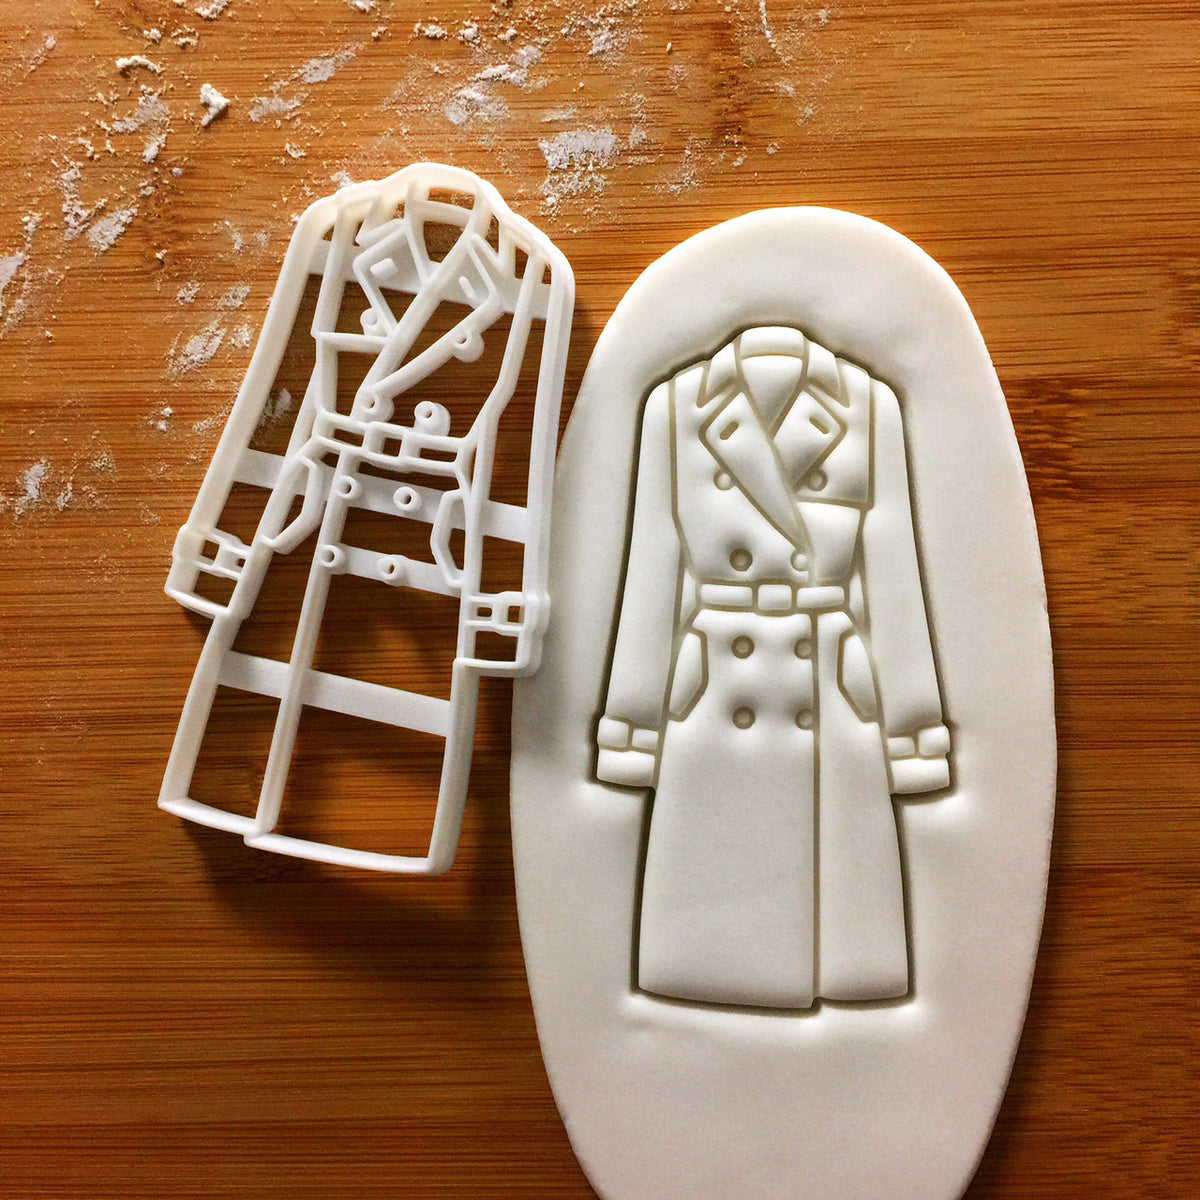 Trench Coat Cookie Cutter